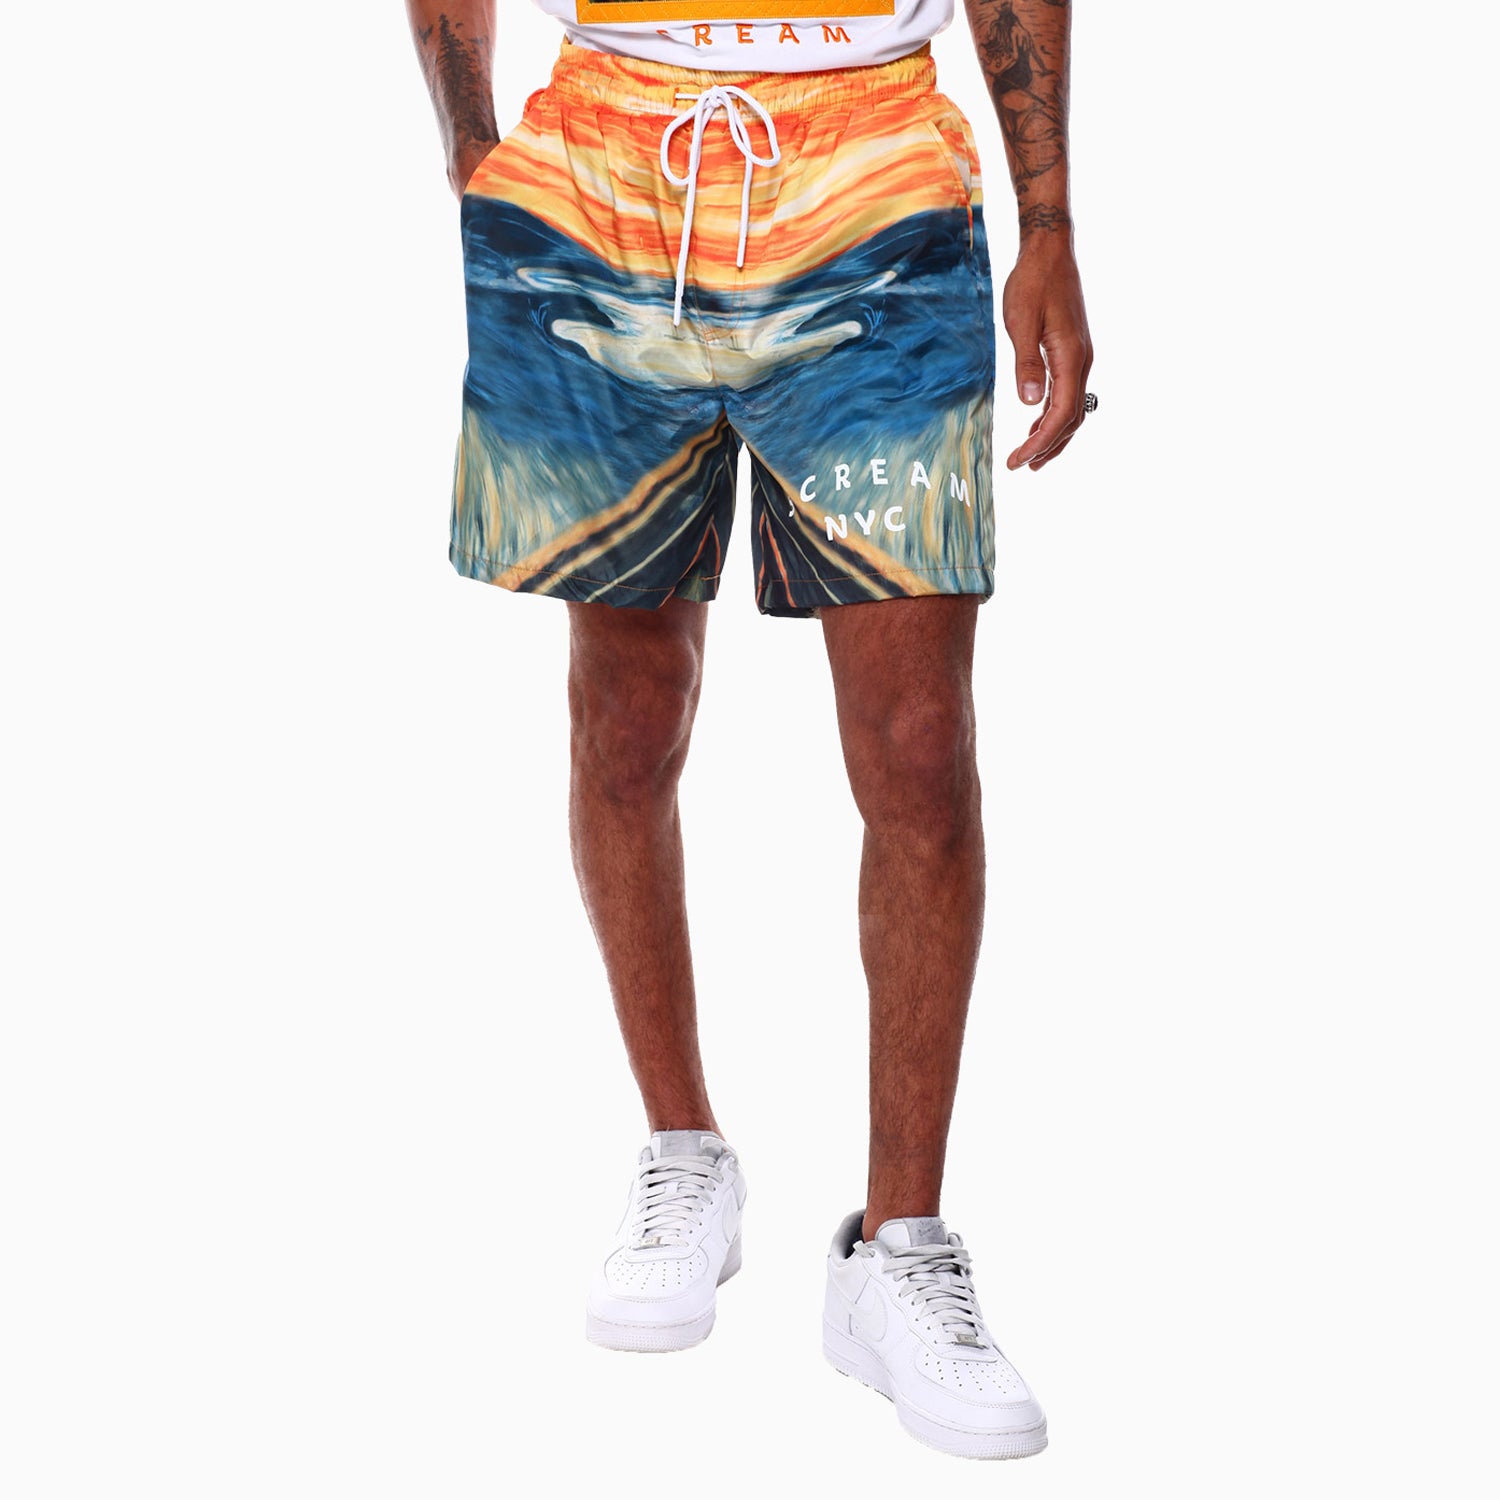 rebel-minds-mens-scream-t-shirt-and-shorts-outfit-131-156-wh-131-956-or